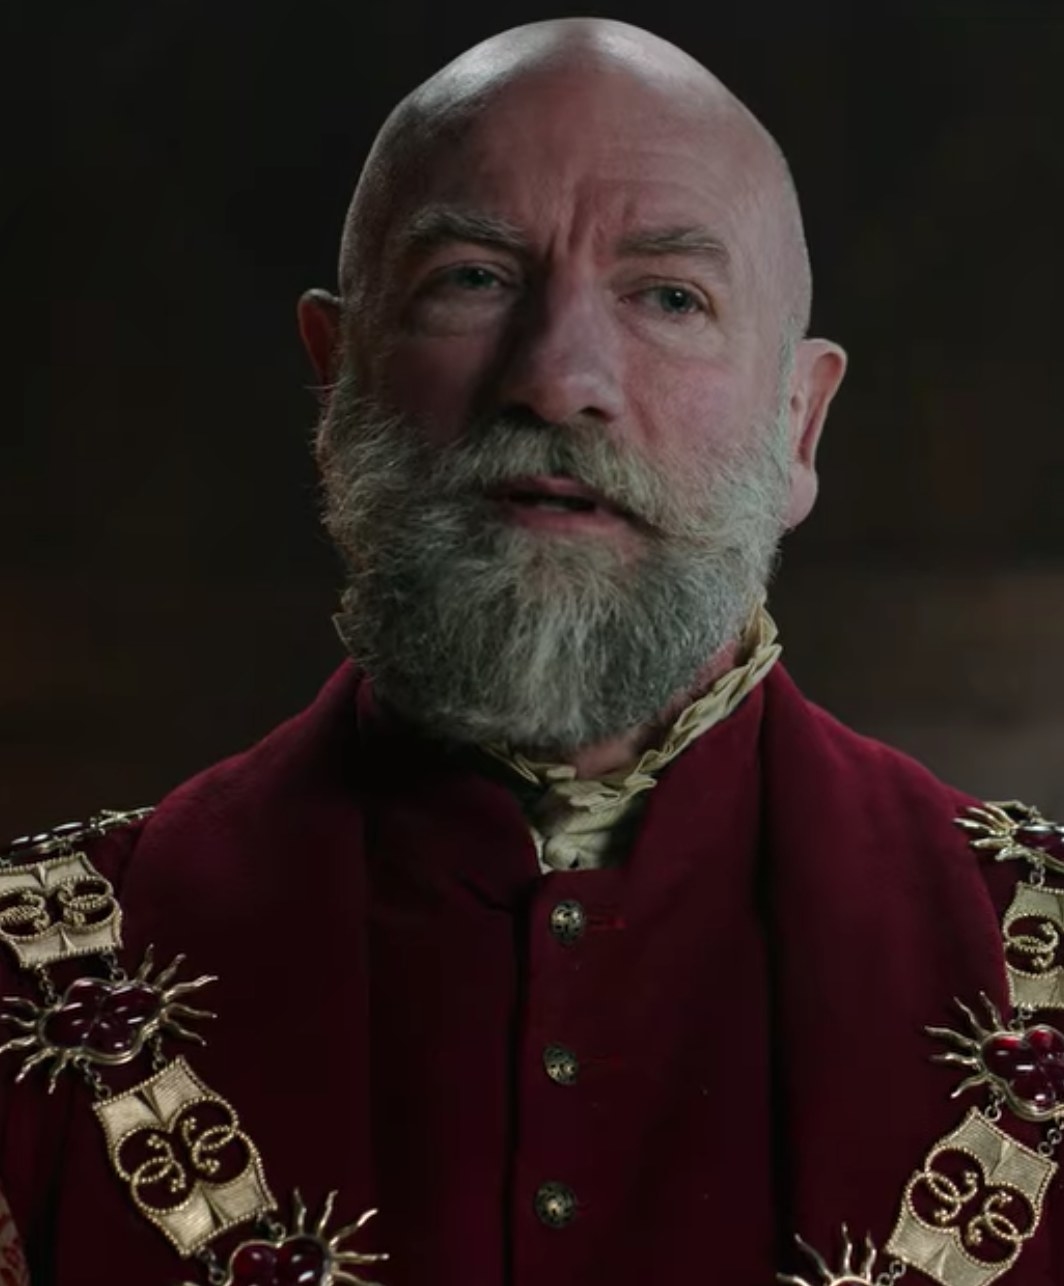 Graham McTavish as Dijkstra discusses the future possibilities for Cintra in &quot;The Witcher&quot;